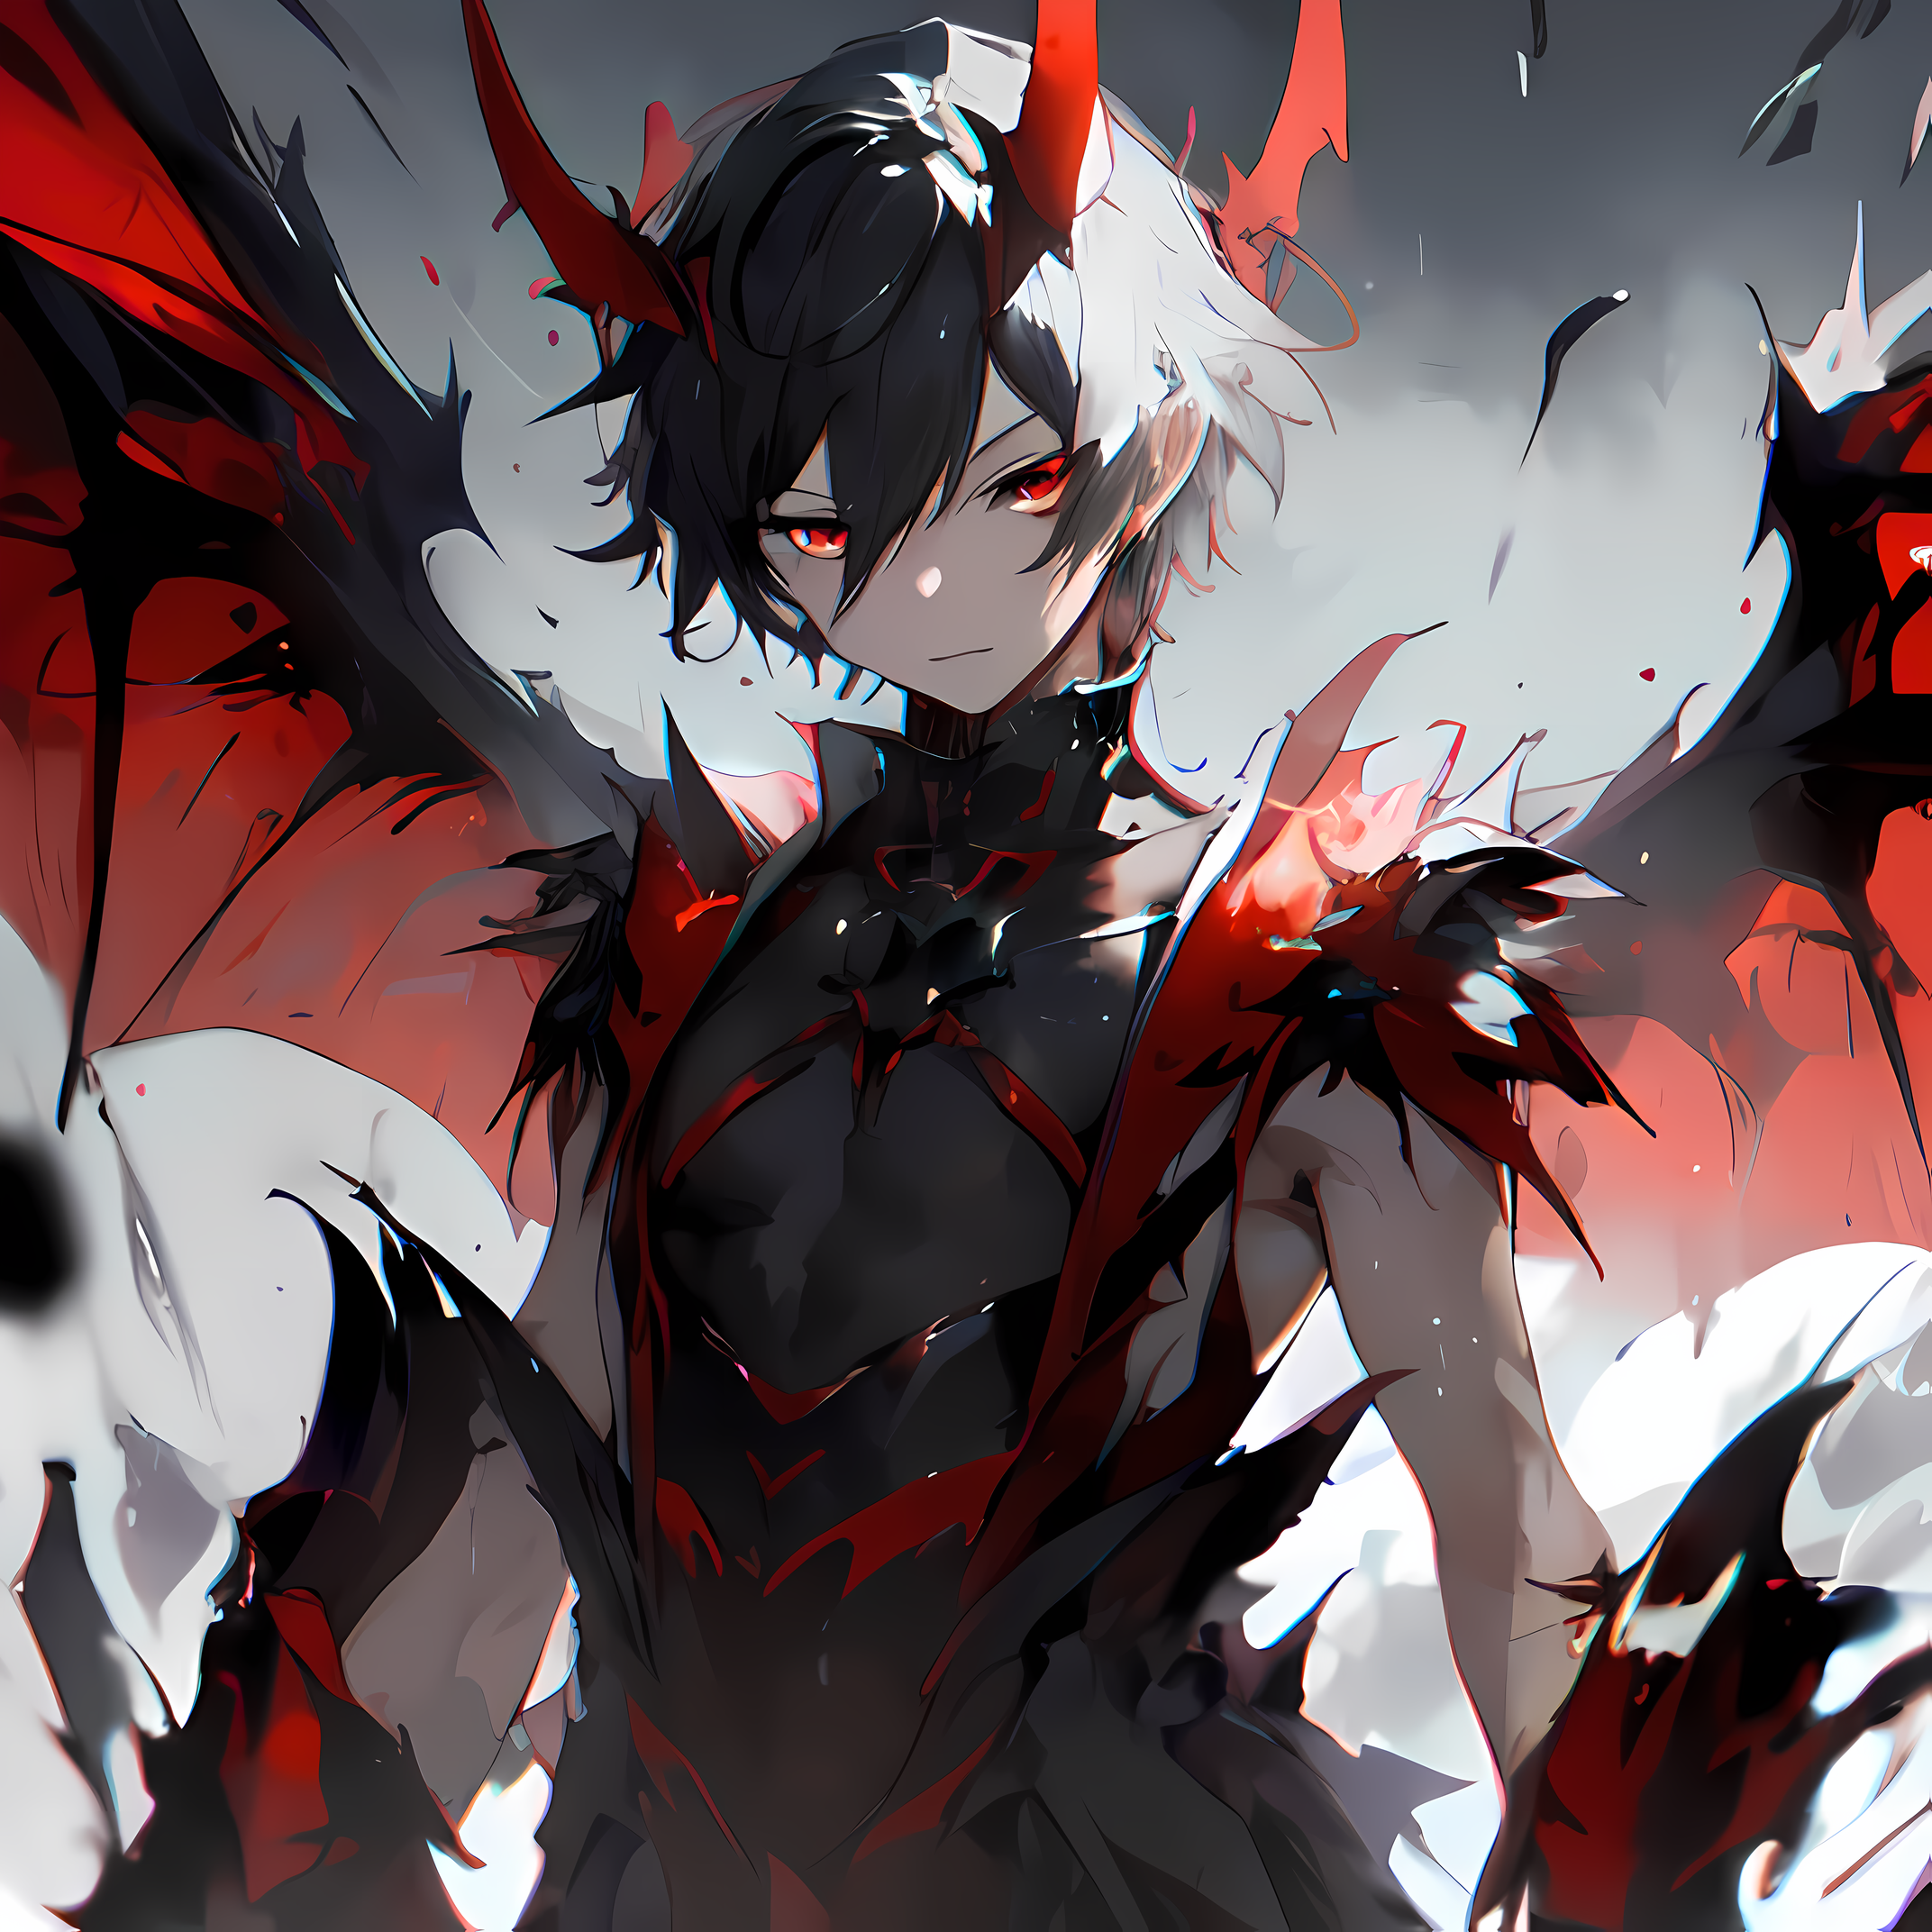 Anime hell king - Anime hell king updated their profile